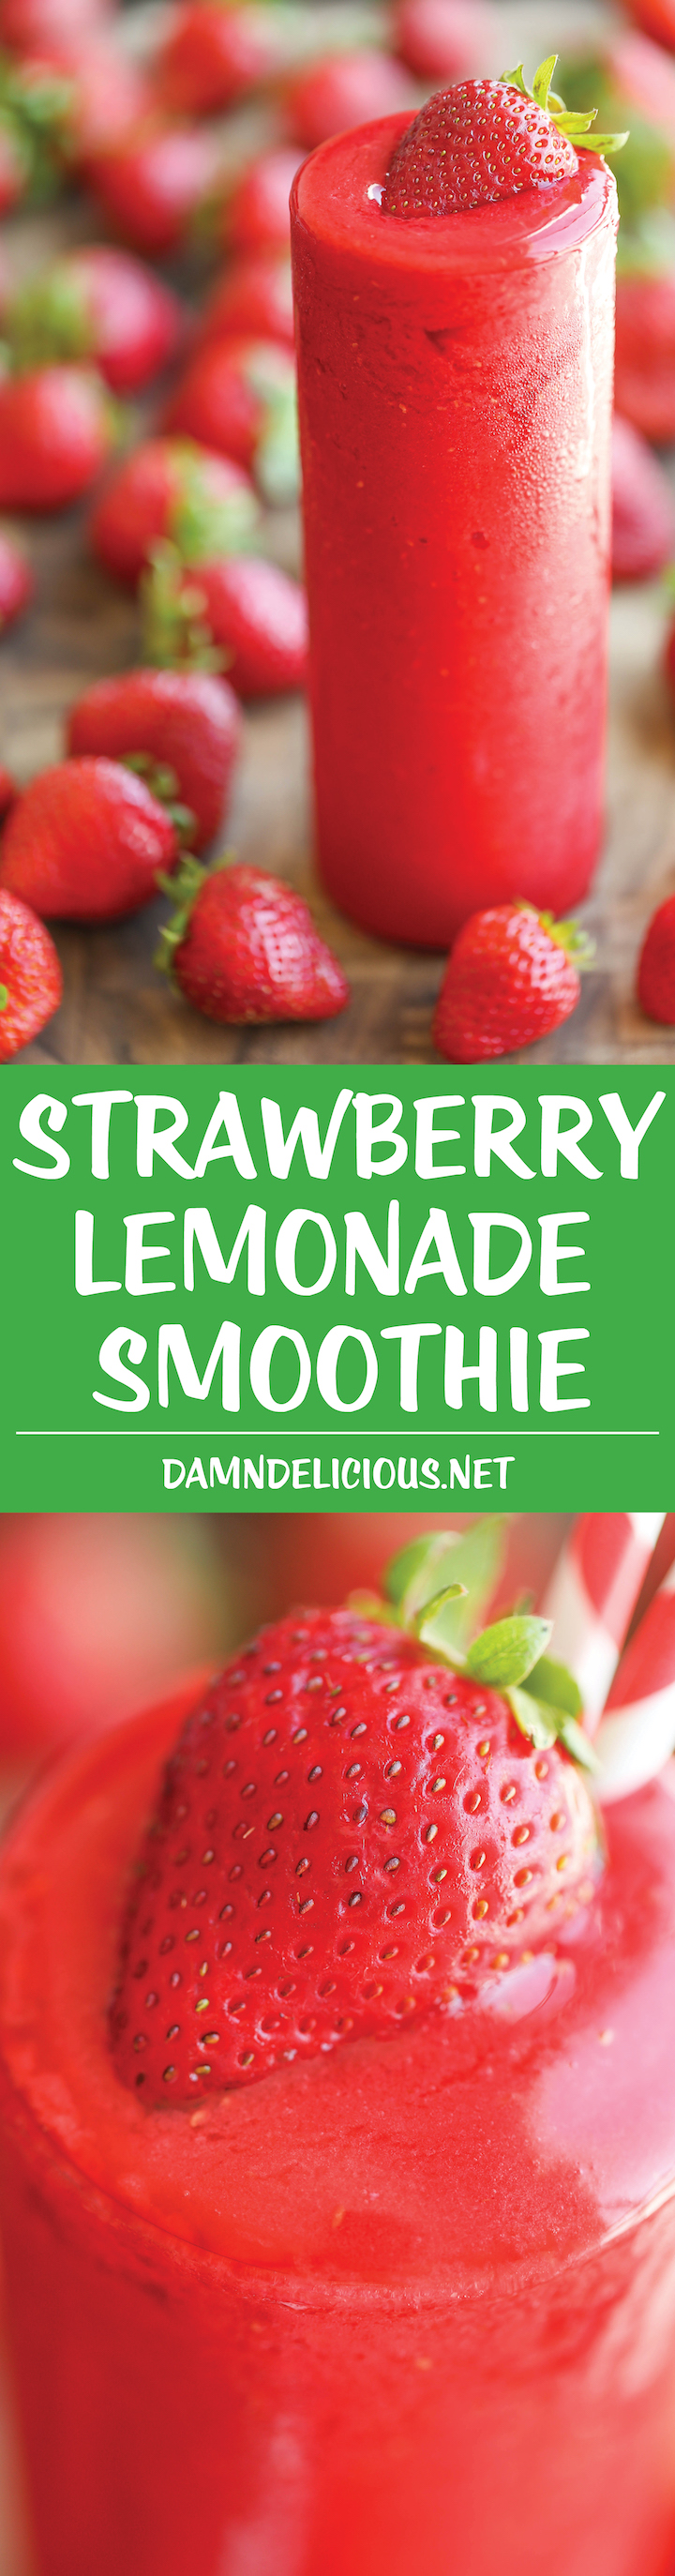 Strawberry Lemonade Smoothie - Sweet, tangy and wonderfully refreshing with just 4 ingredients, made completely from scratch. No frozen concentrate here!